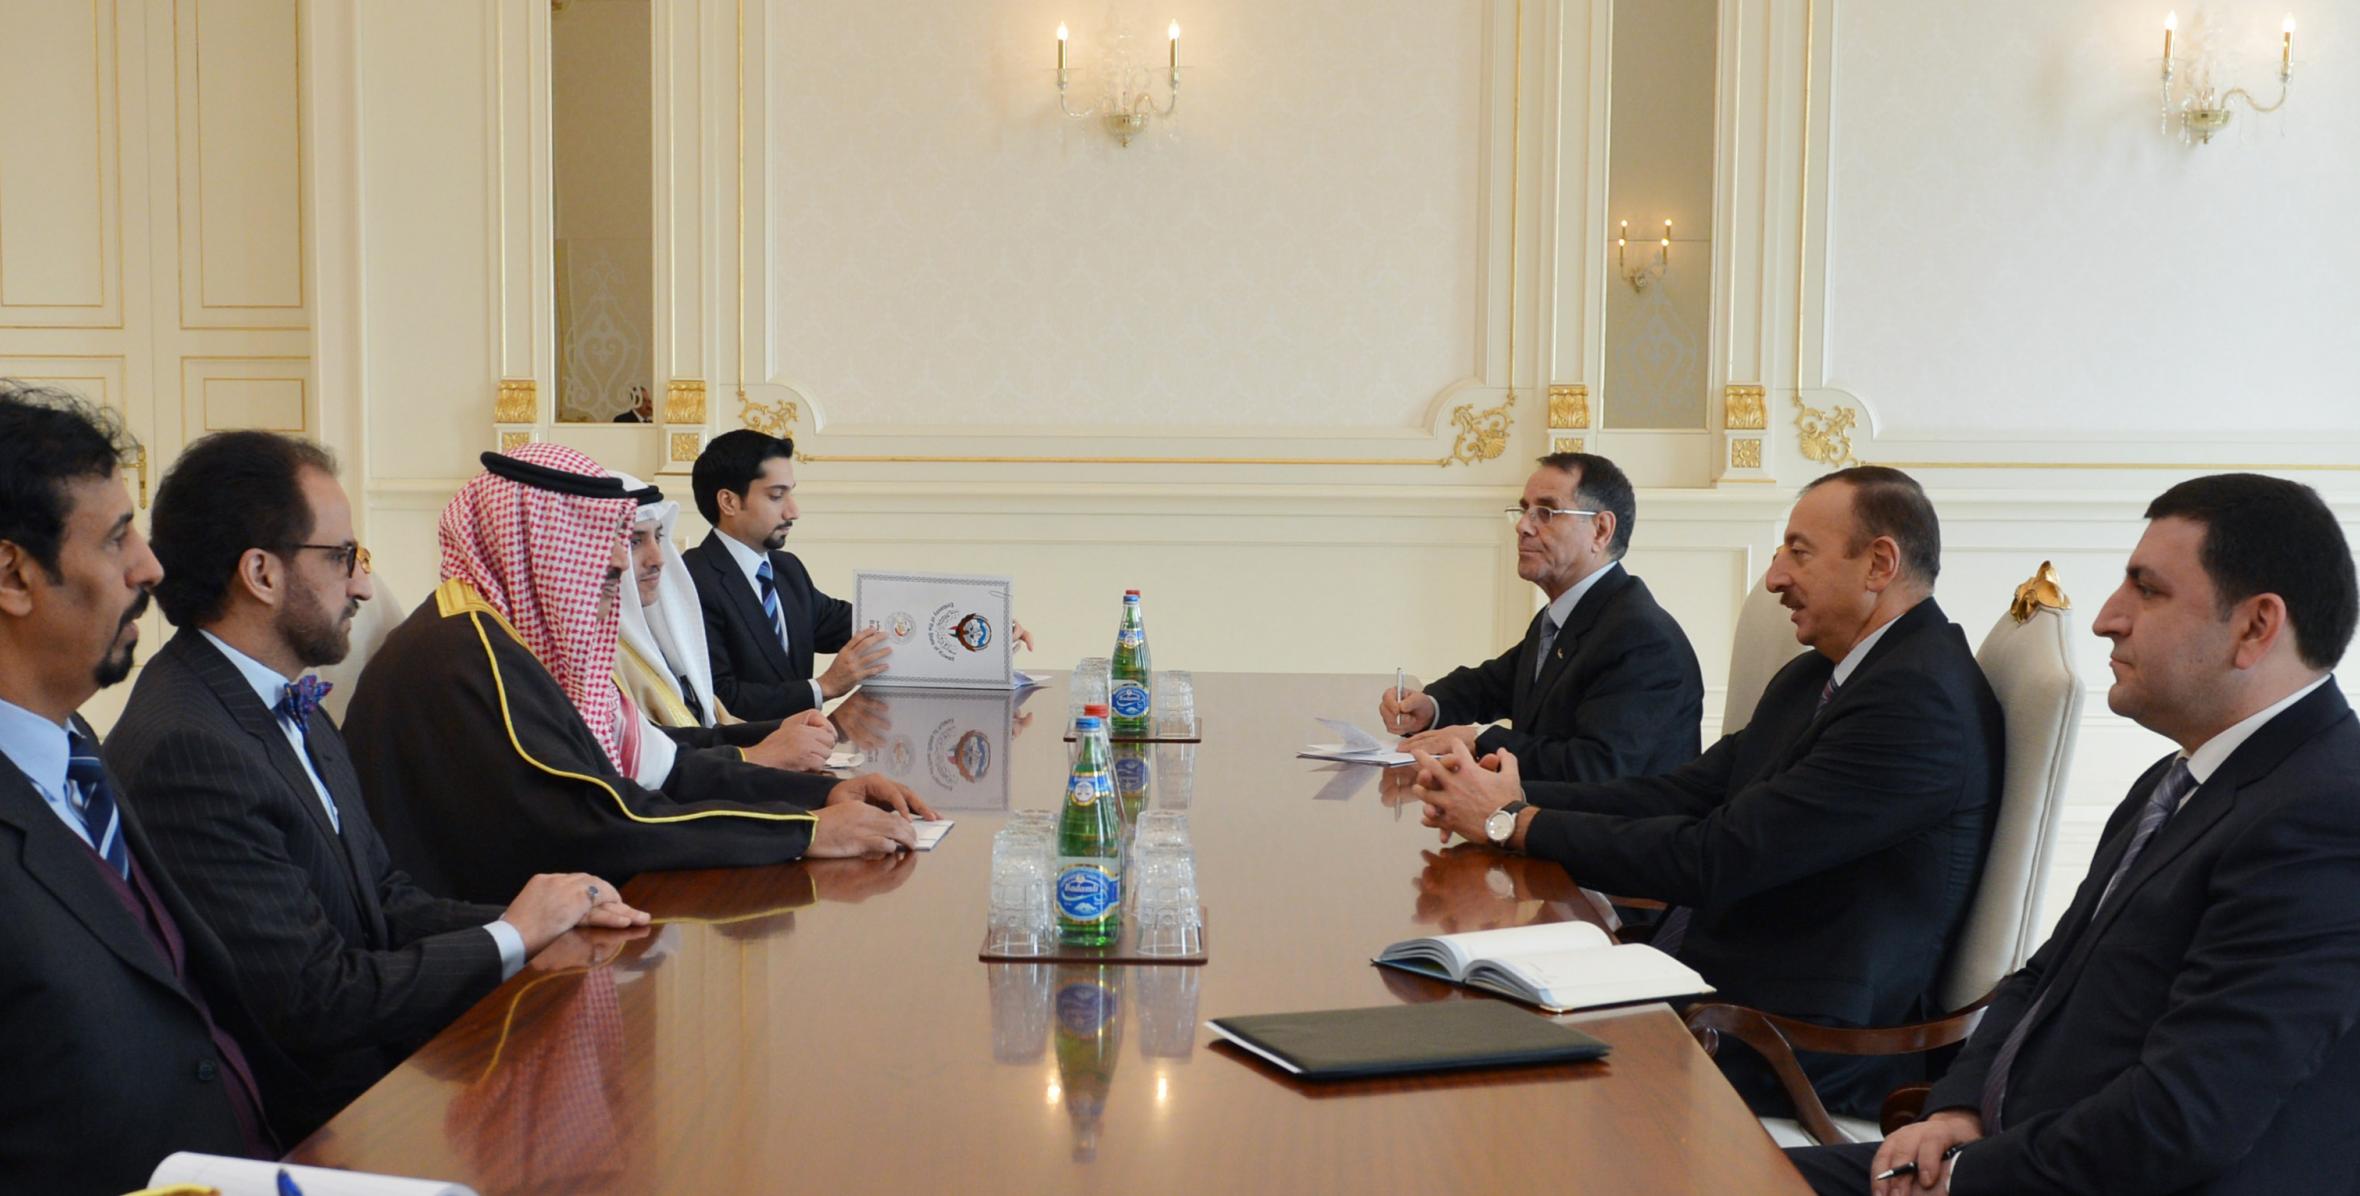 Ilham Aliyev received a delegation led by the Deputy Prime Minister and Minister of Foreign Affairs of the State of Kuwait